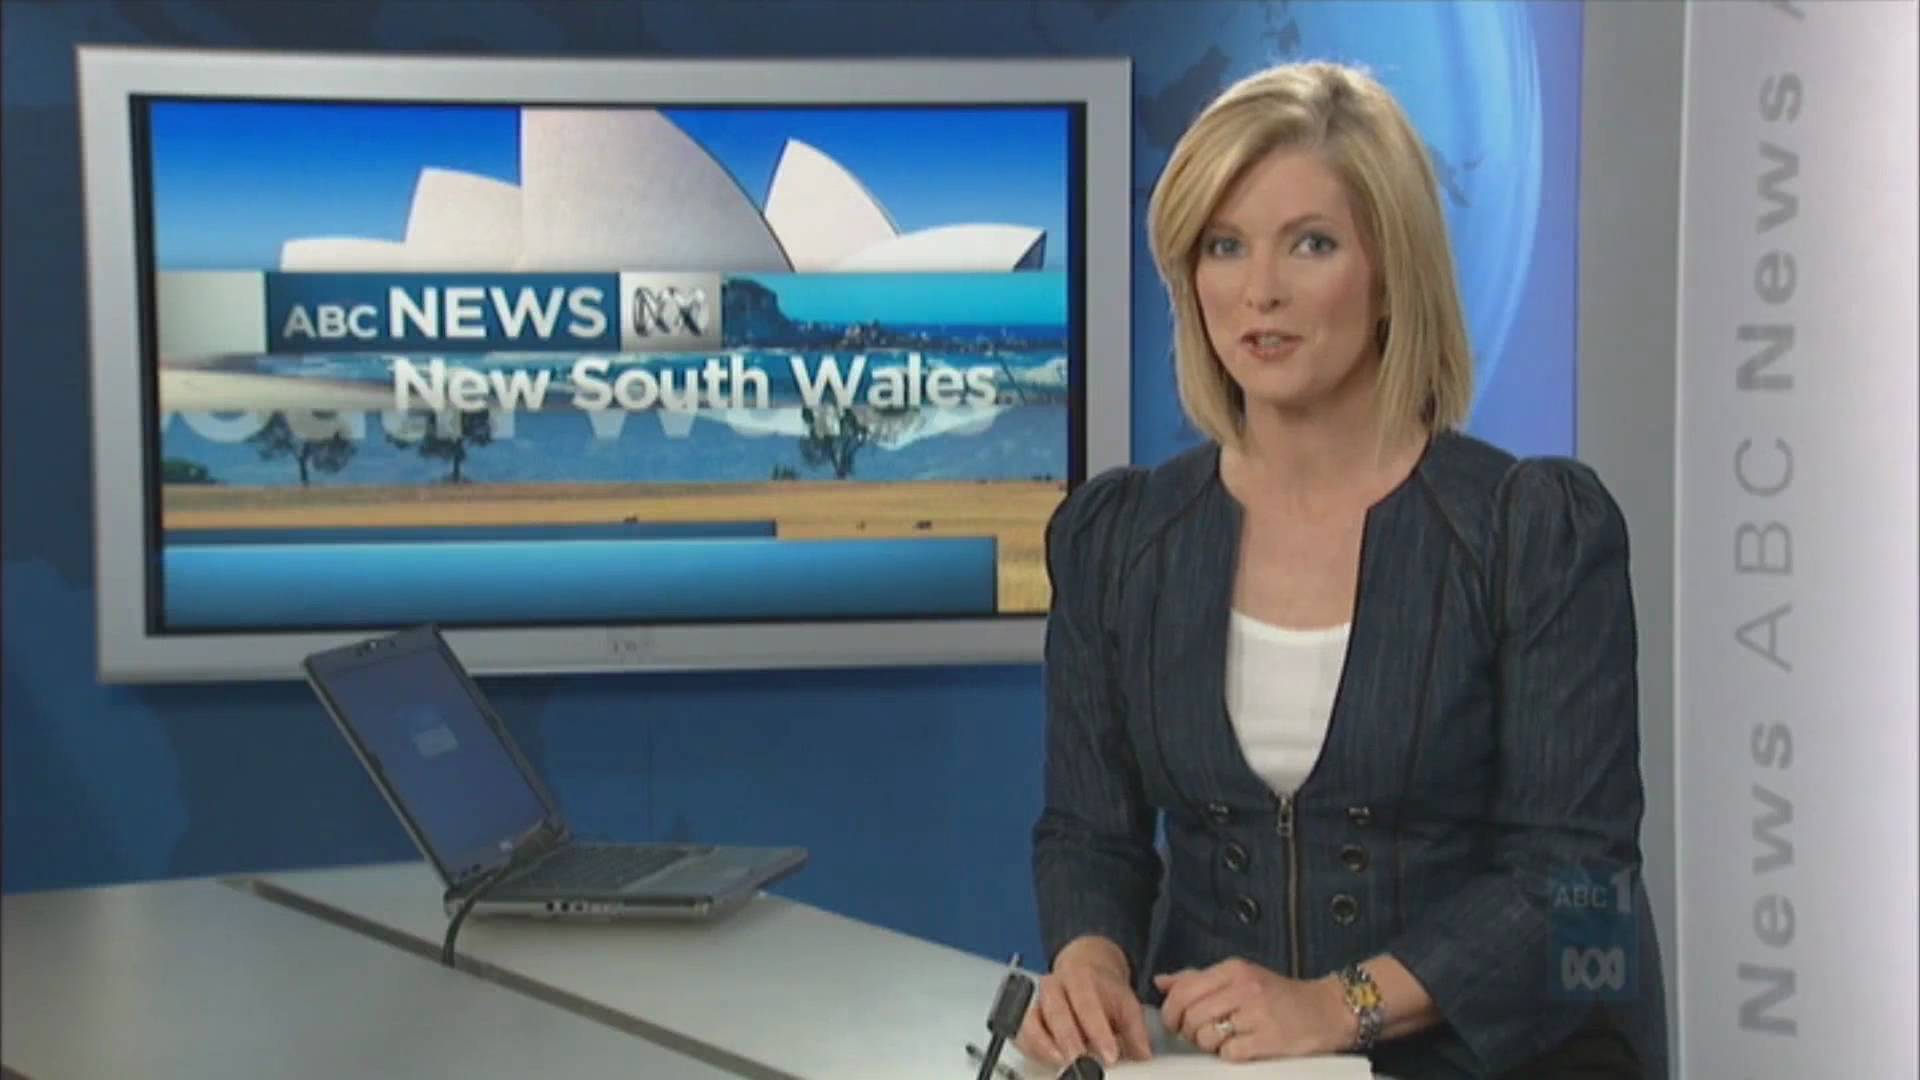 ABC News 24 New Look / Relaunch - YouTube